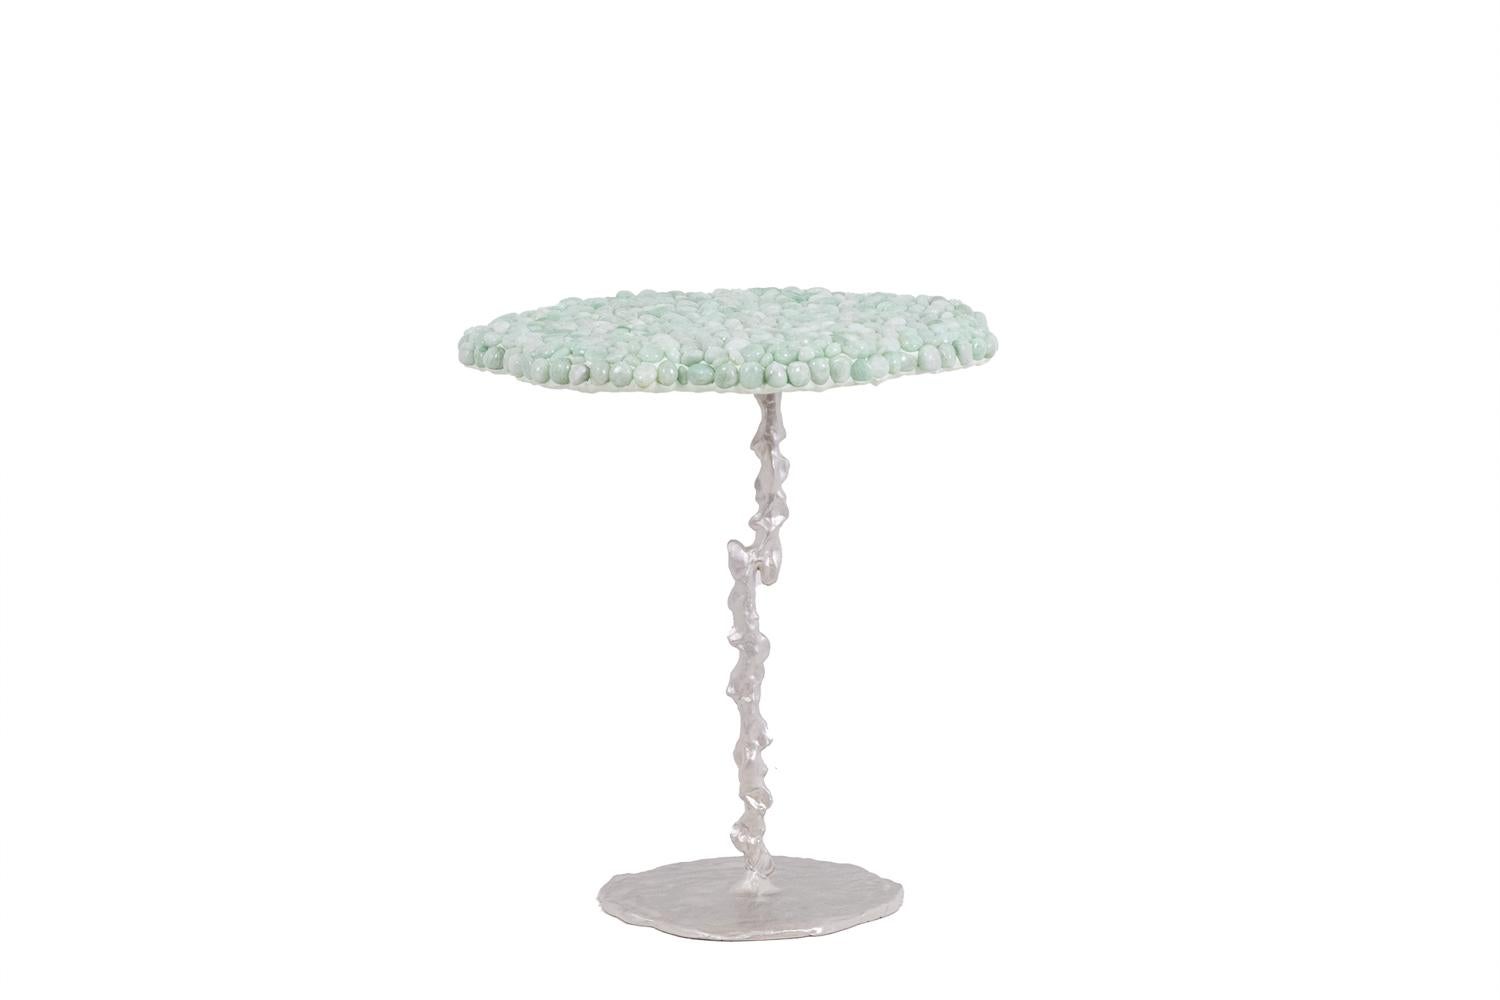 Decorative pedestal table. Top in amazonite and semi-precious stone resting on a silver metal base.

Dimensions: H x D cm

Contemporary French artisanal work, small series.

Reference: LS60012167U